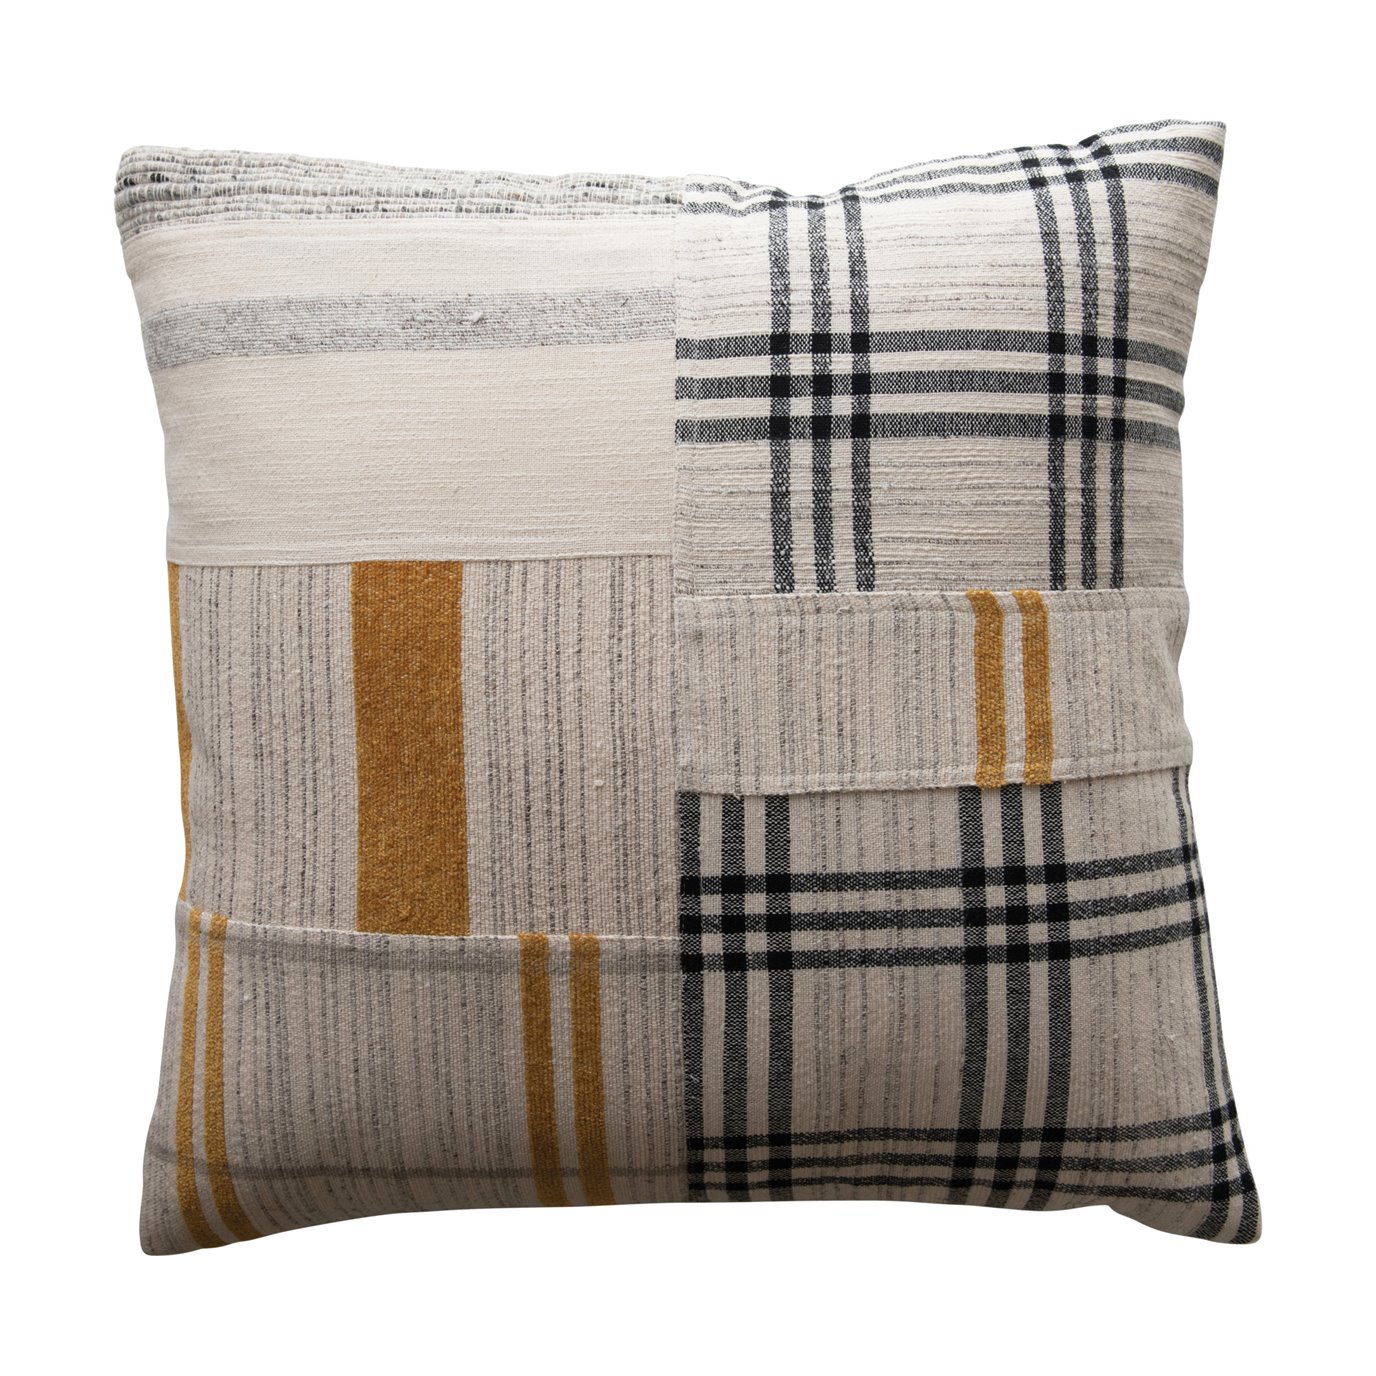 Square Patchwork Black & Mustard Woven Cotton & Wool Pillow